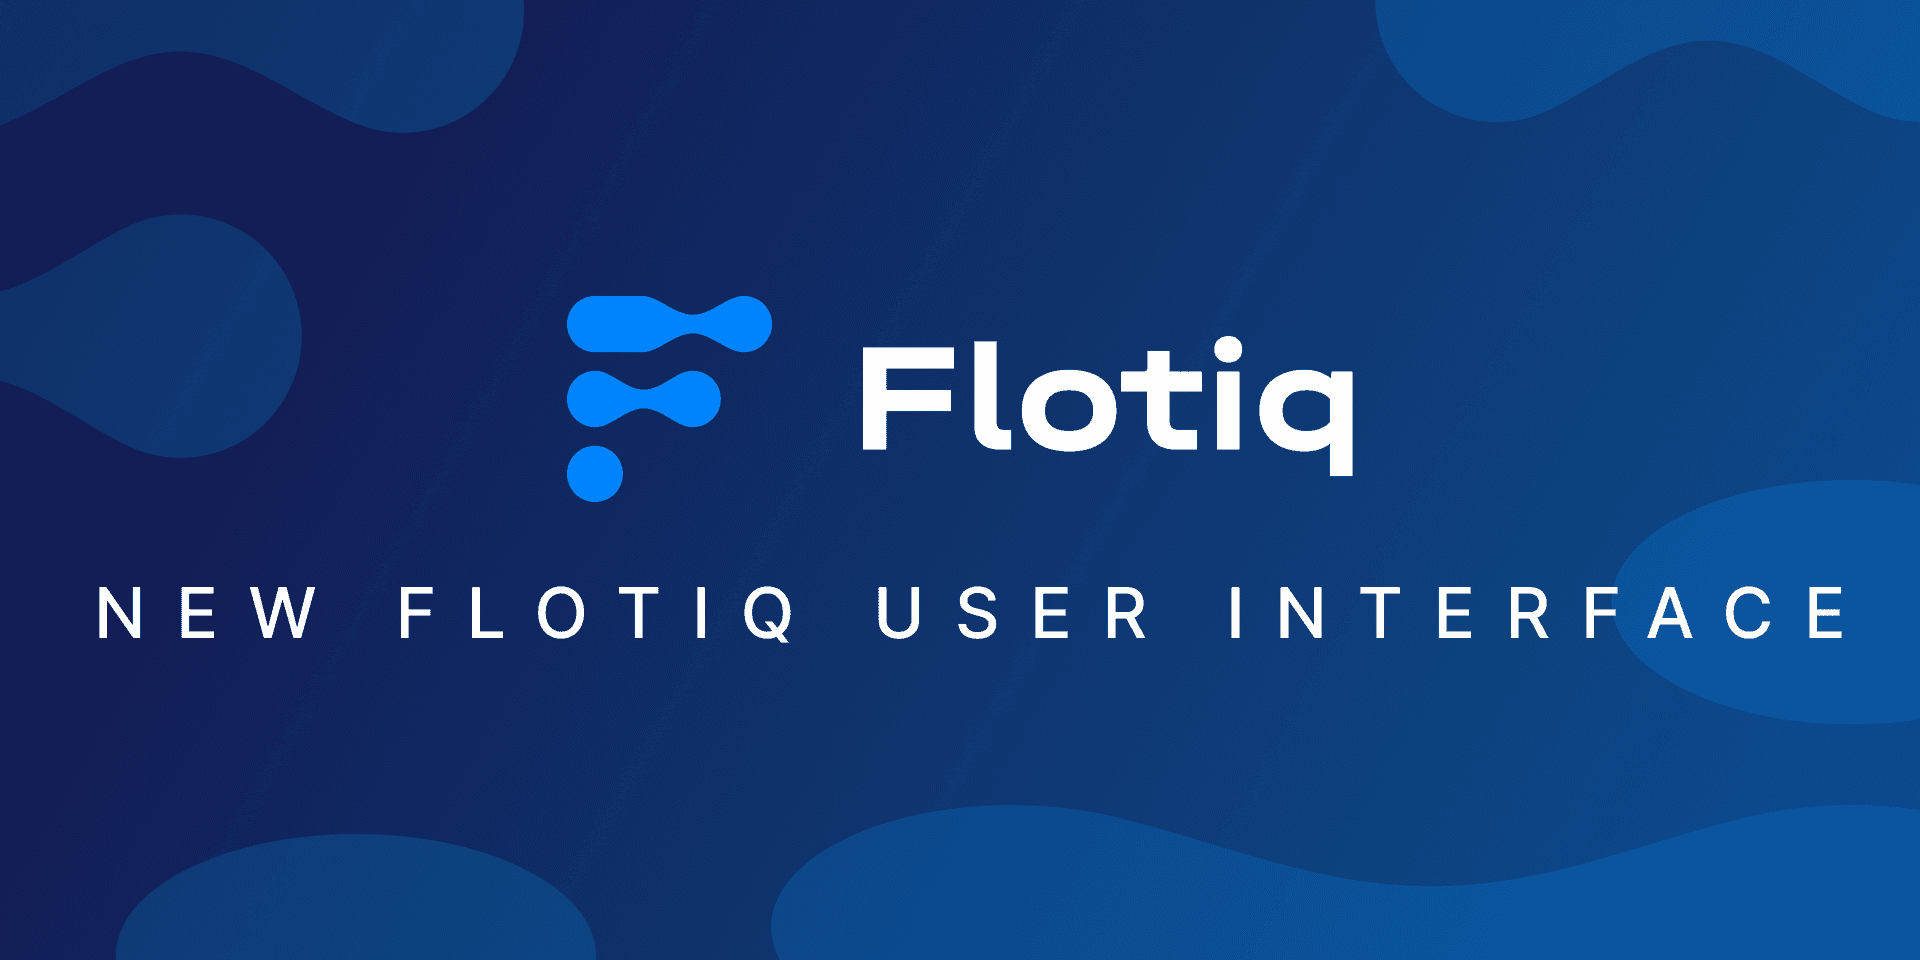 Coming soon – New Flotiq User Interface